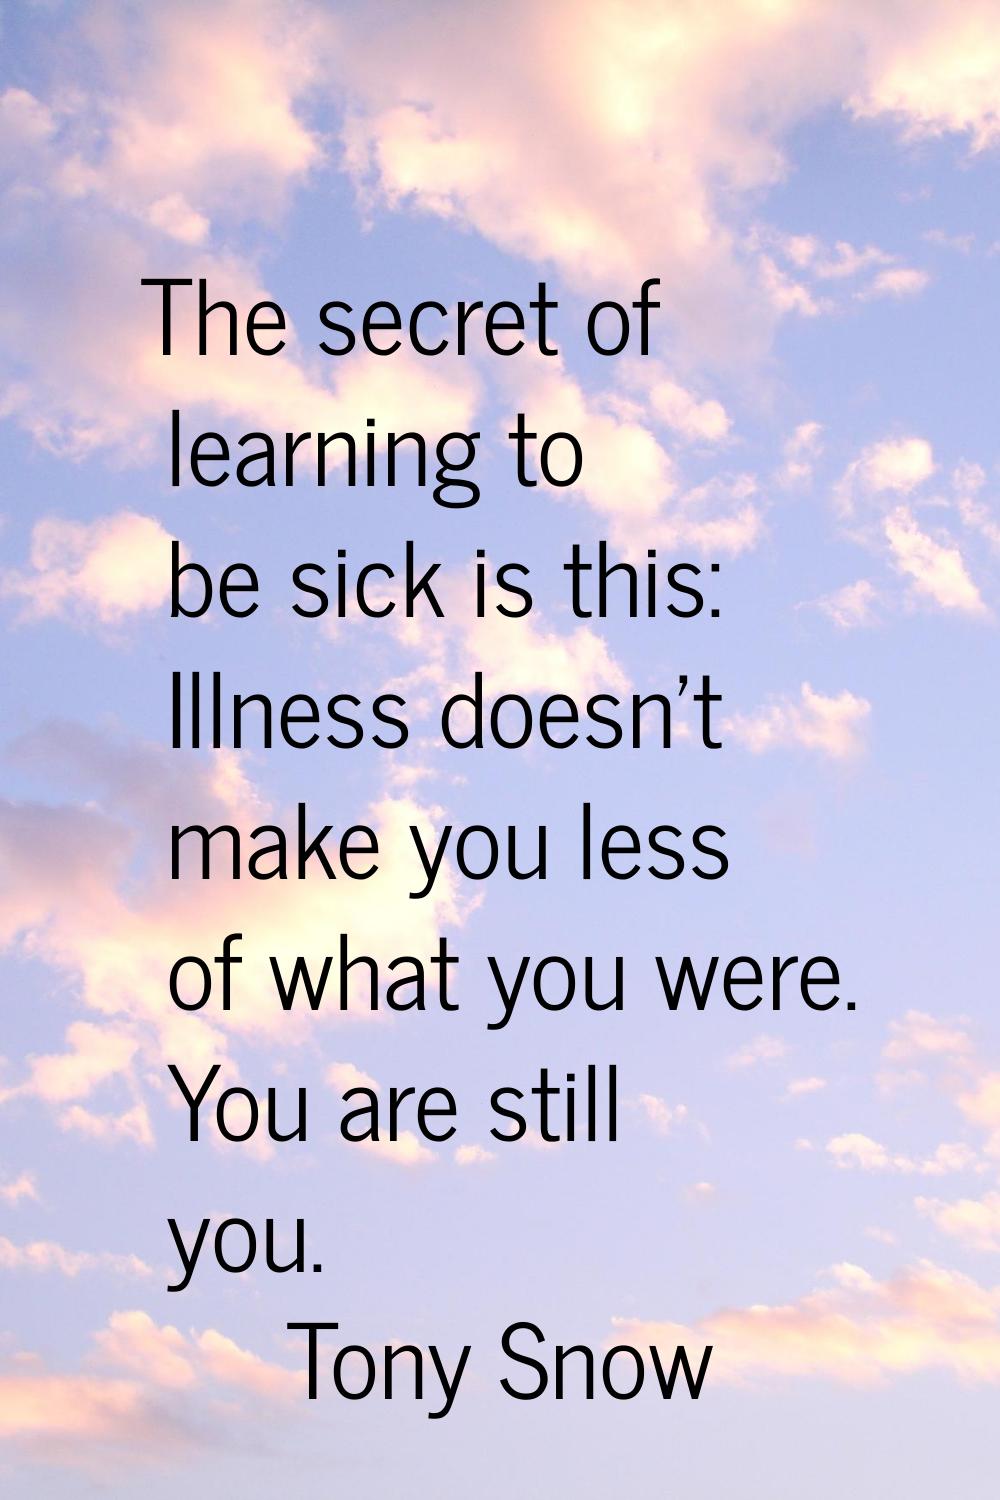 The secret of learning to be sick is this: Illness doesn't make you less of what you were. You are 